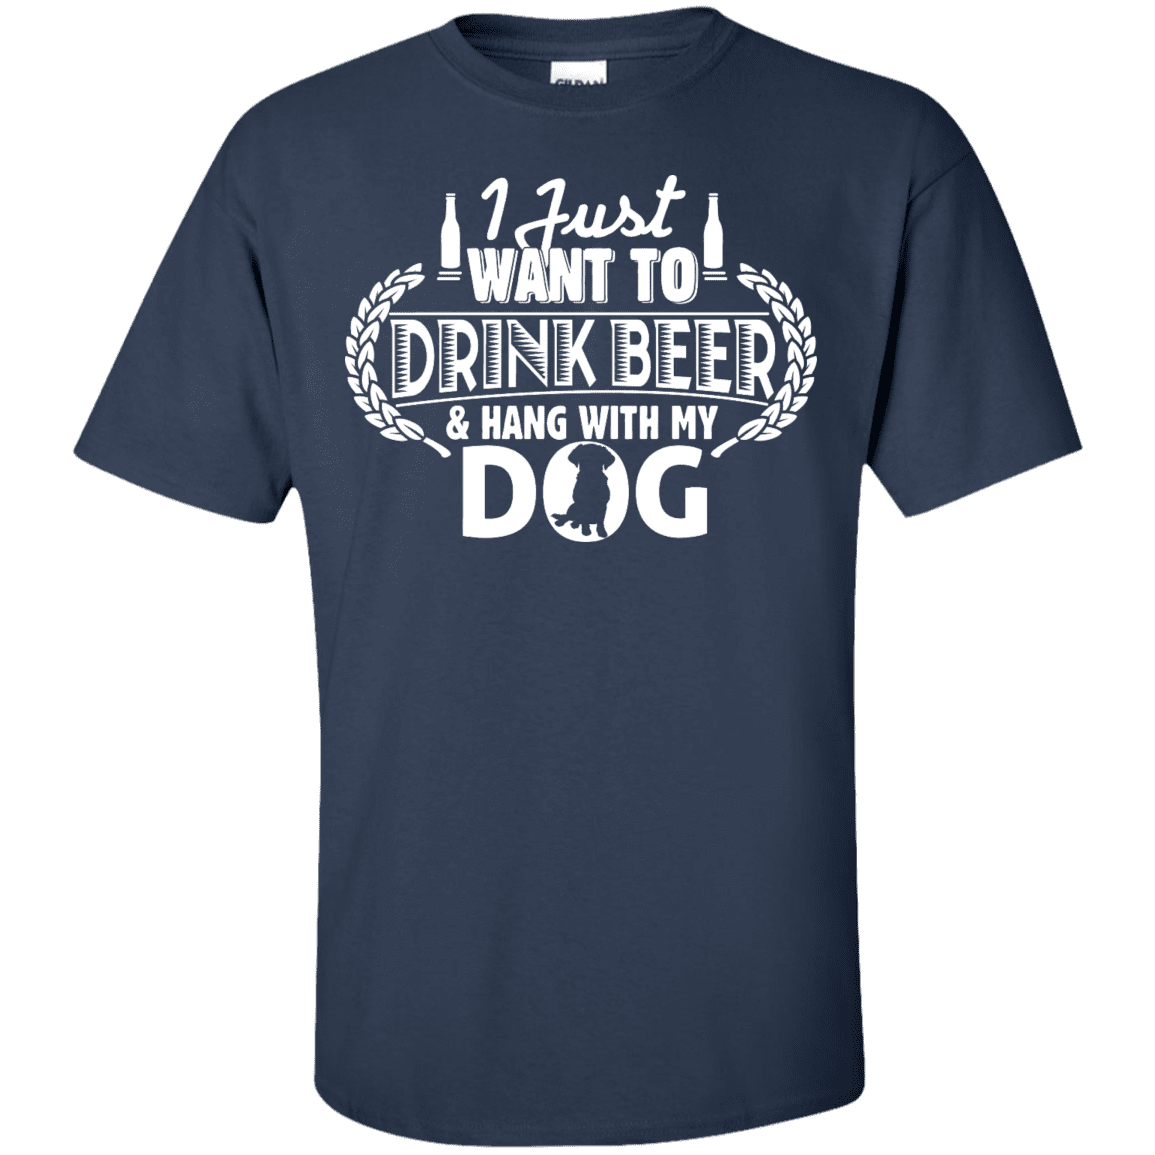 Drink Beer Hang With My Dog - T Shirt.